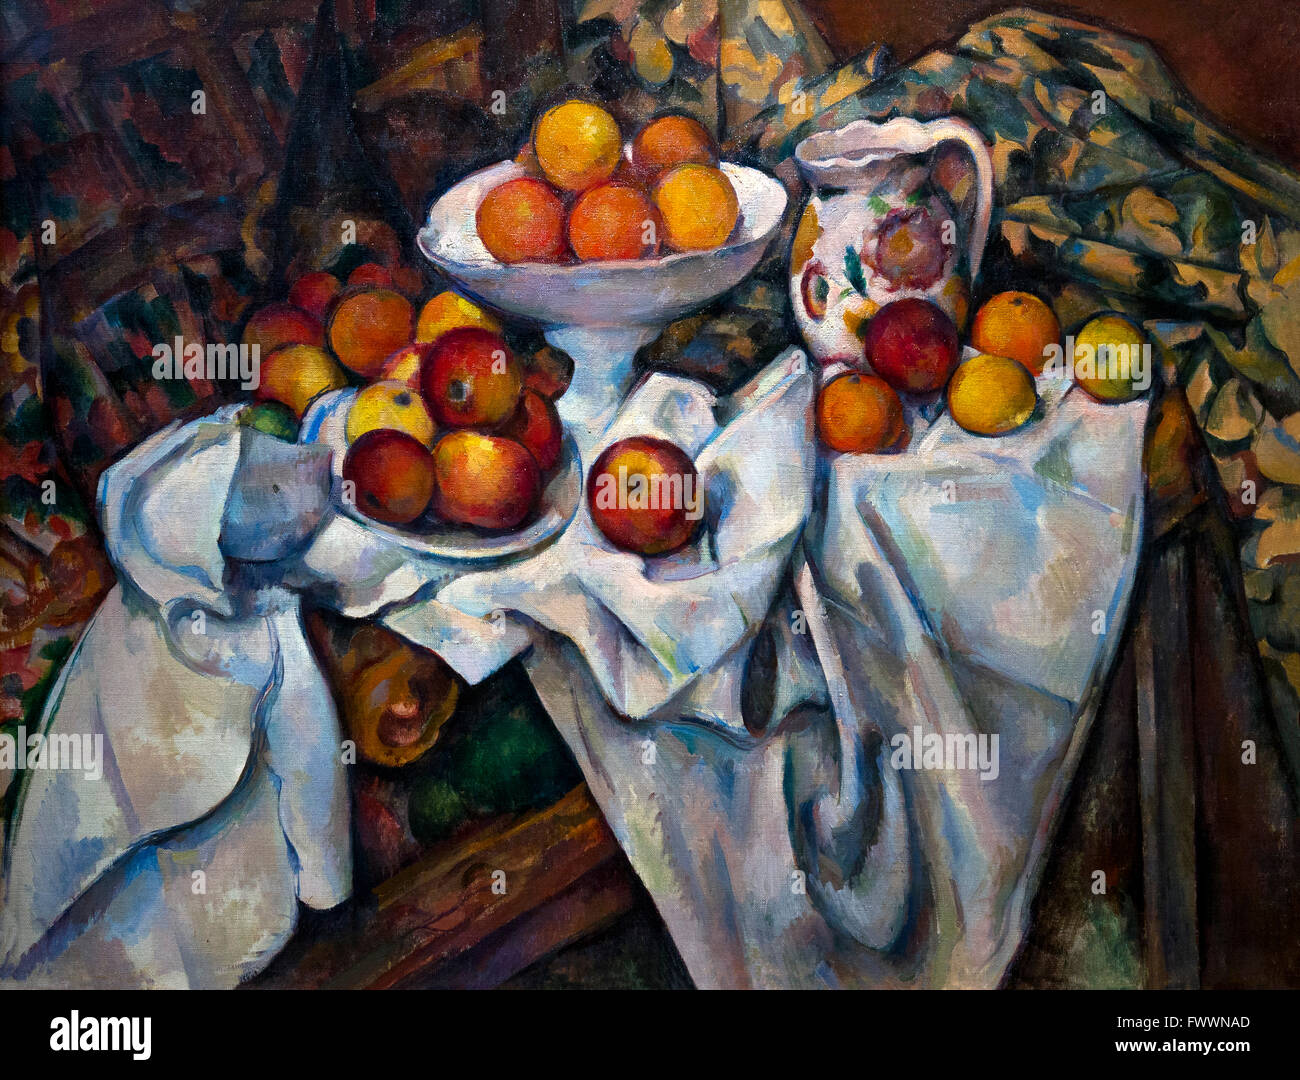 Apples and oranges, Pommes et Oranges, by Paul Cezanne, circa 1899, Musee D'Orsay, Paris, France, Europe Stock Photo